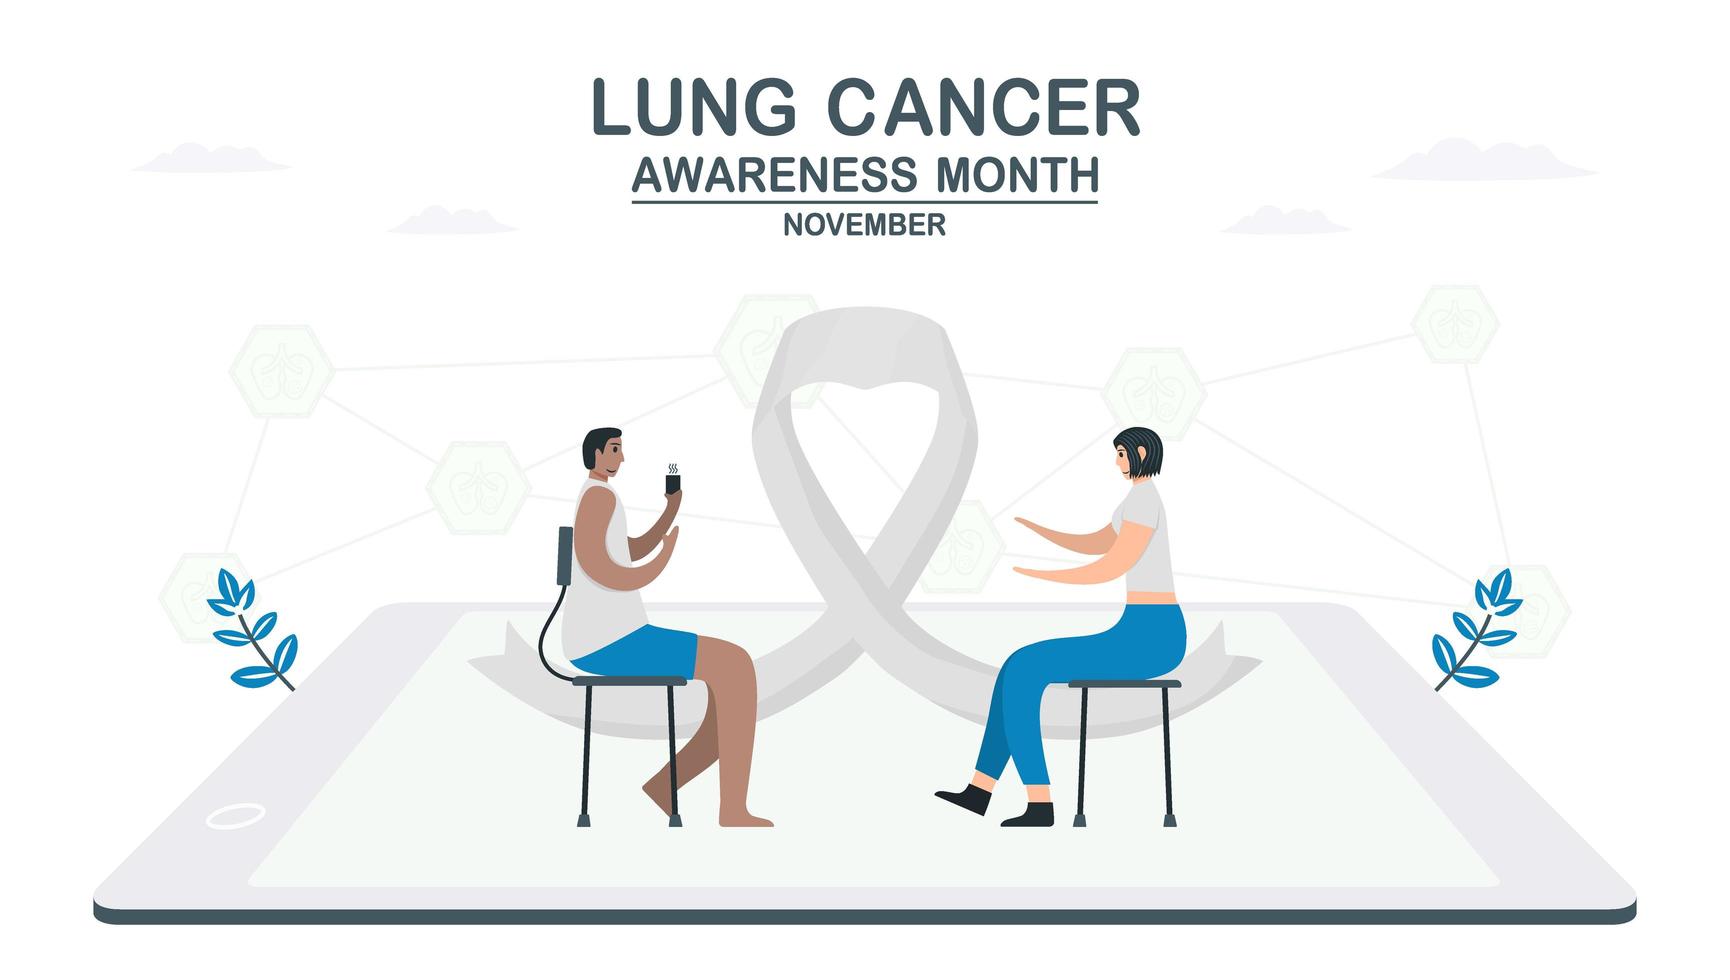 Lung cancer awareness month, November. Community about lung cancer. Graphic for banner, poster, background and advertisments. Flat vector illustration isolated on white background.